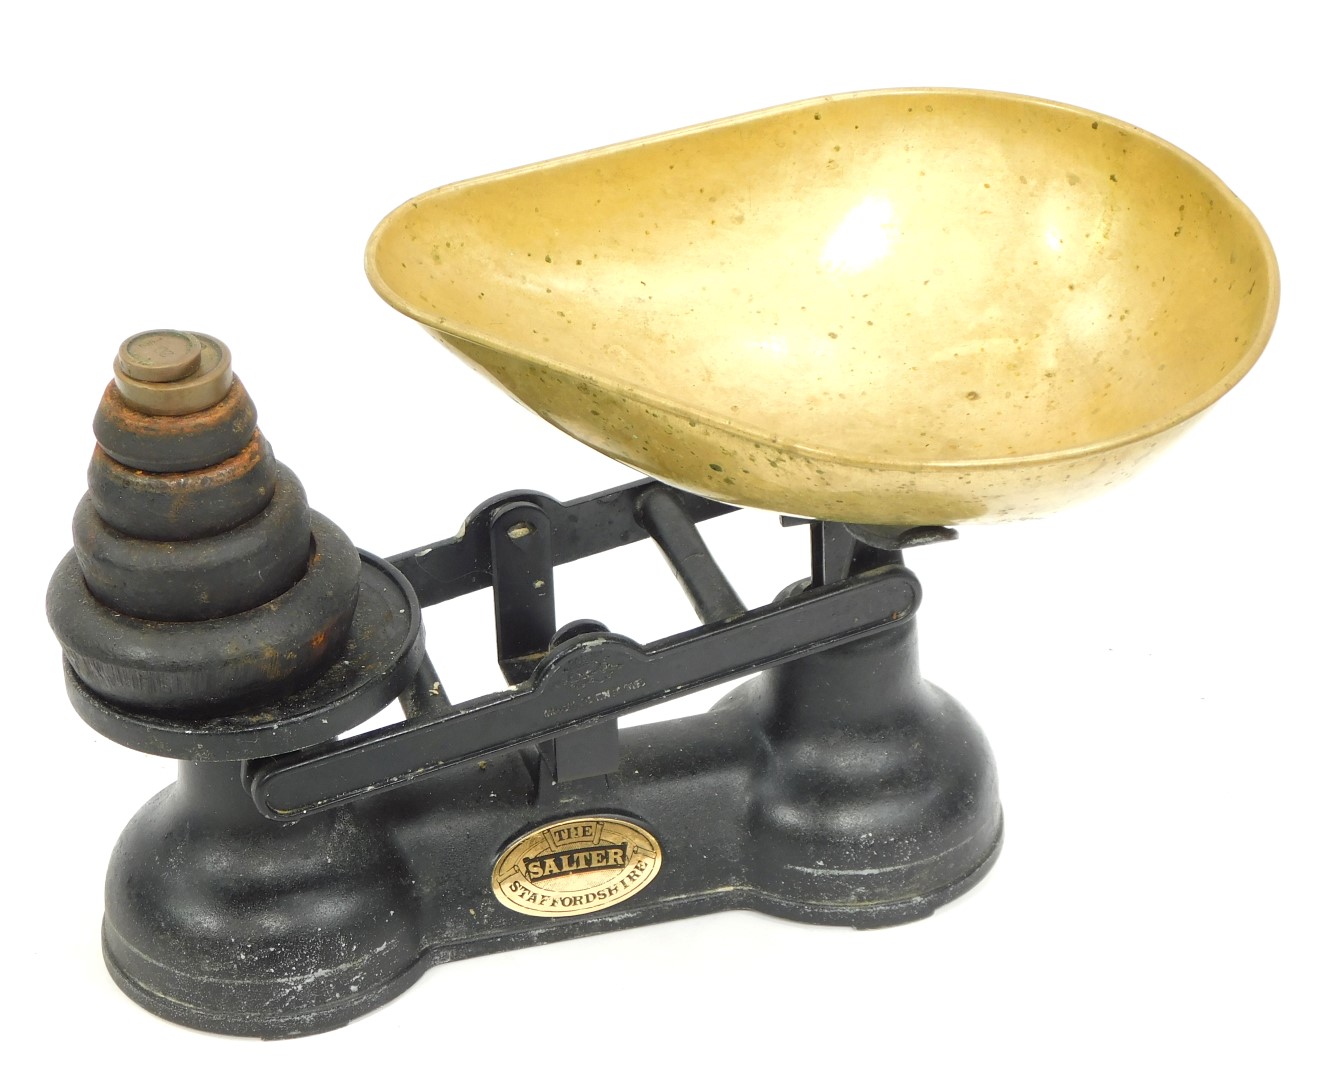 A set of Salter balance scales, and a small group of weights.